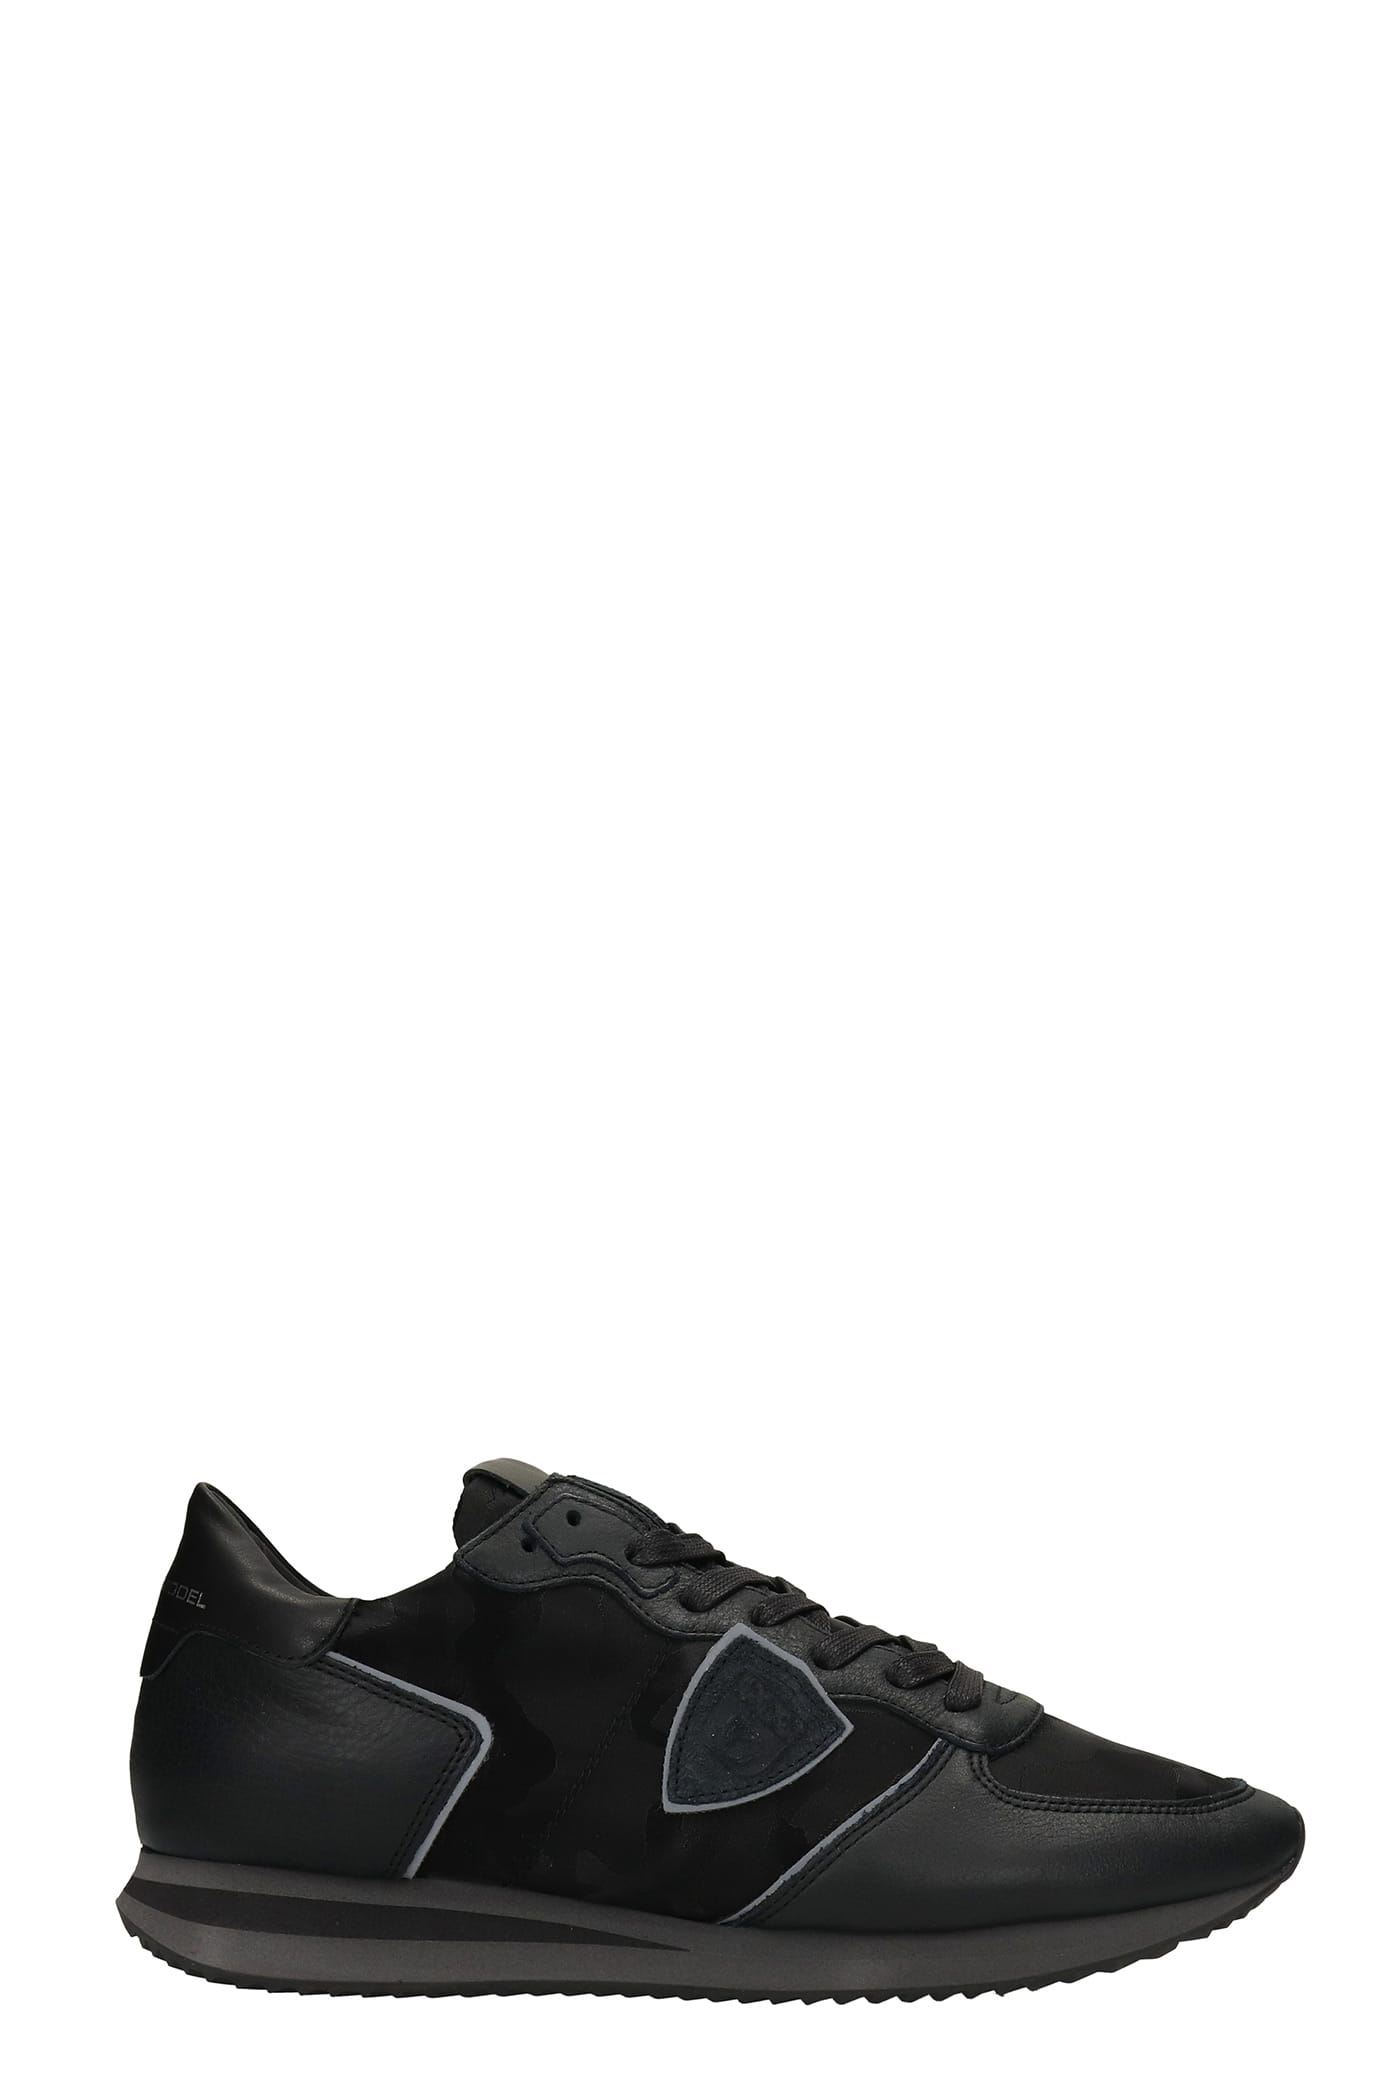 Philippe Model Trpx Sneakers In Black Leather And Fabric